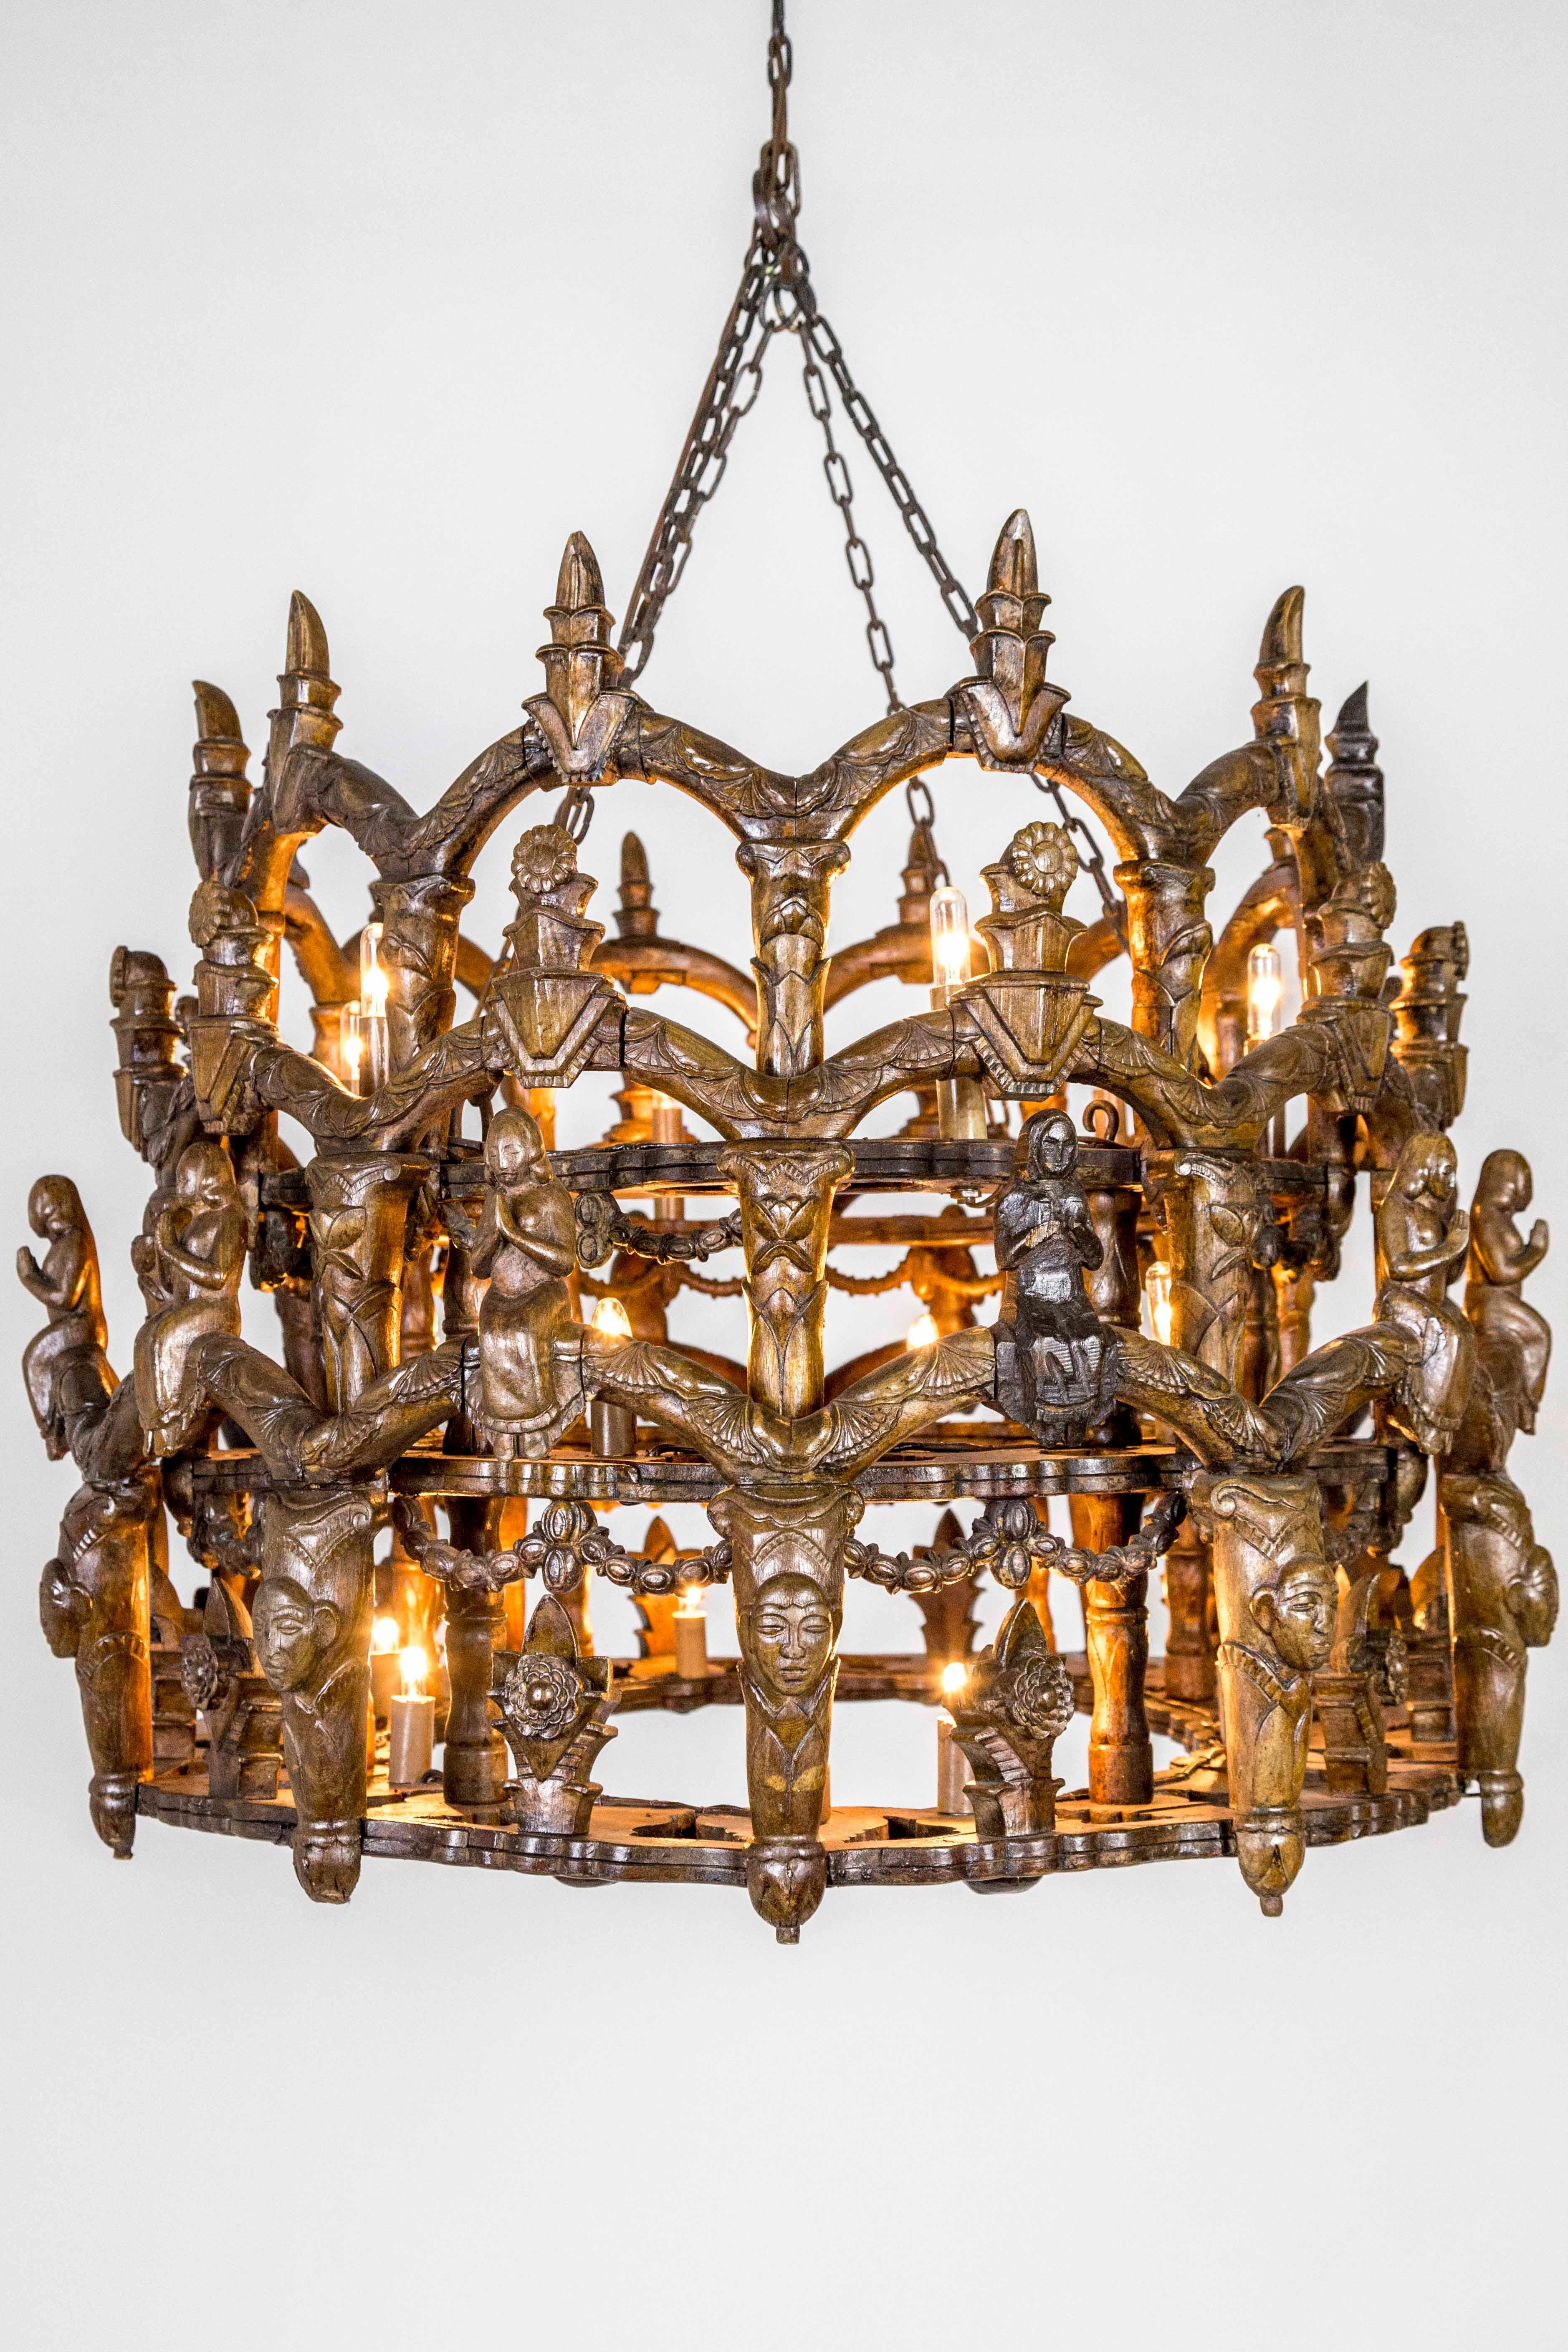 Carved Wooden S. American Folk Chandelier with Figures and Arches 3